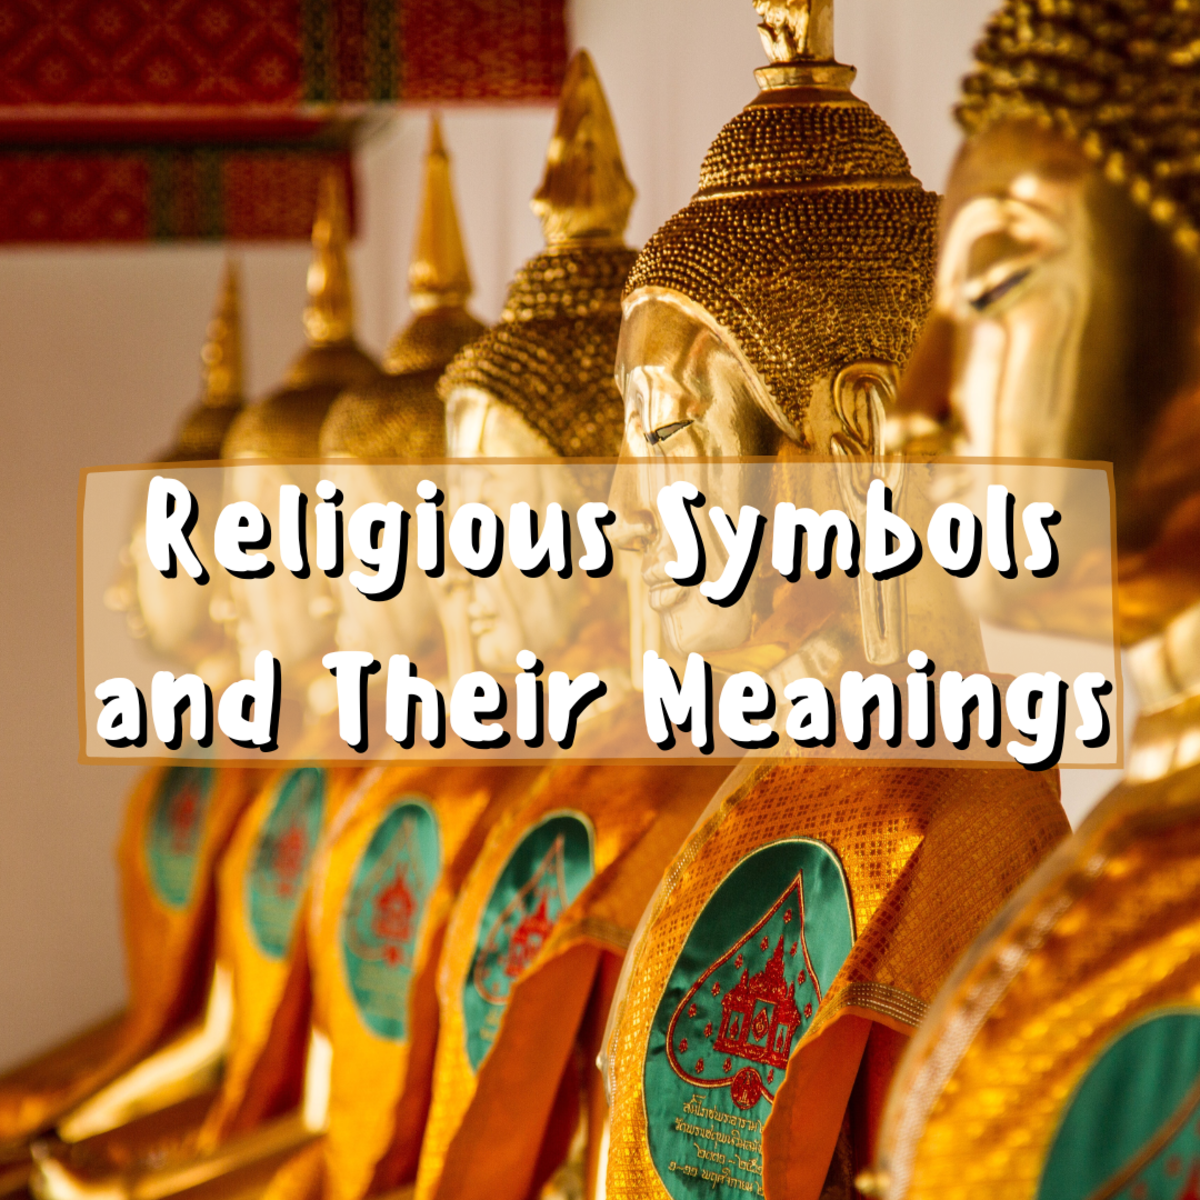 Want to learn about religious symbols and meanings? This article will give you a great start!